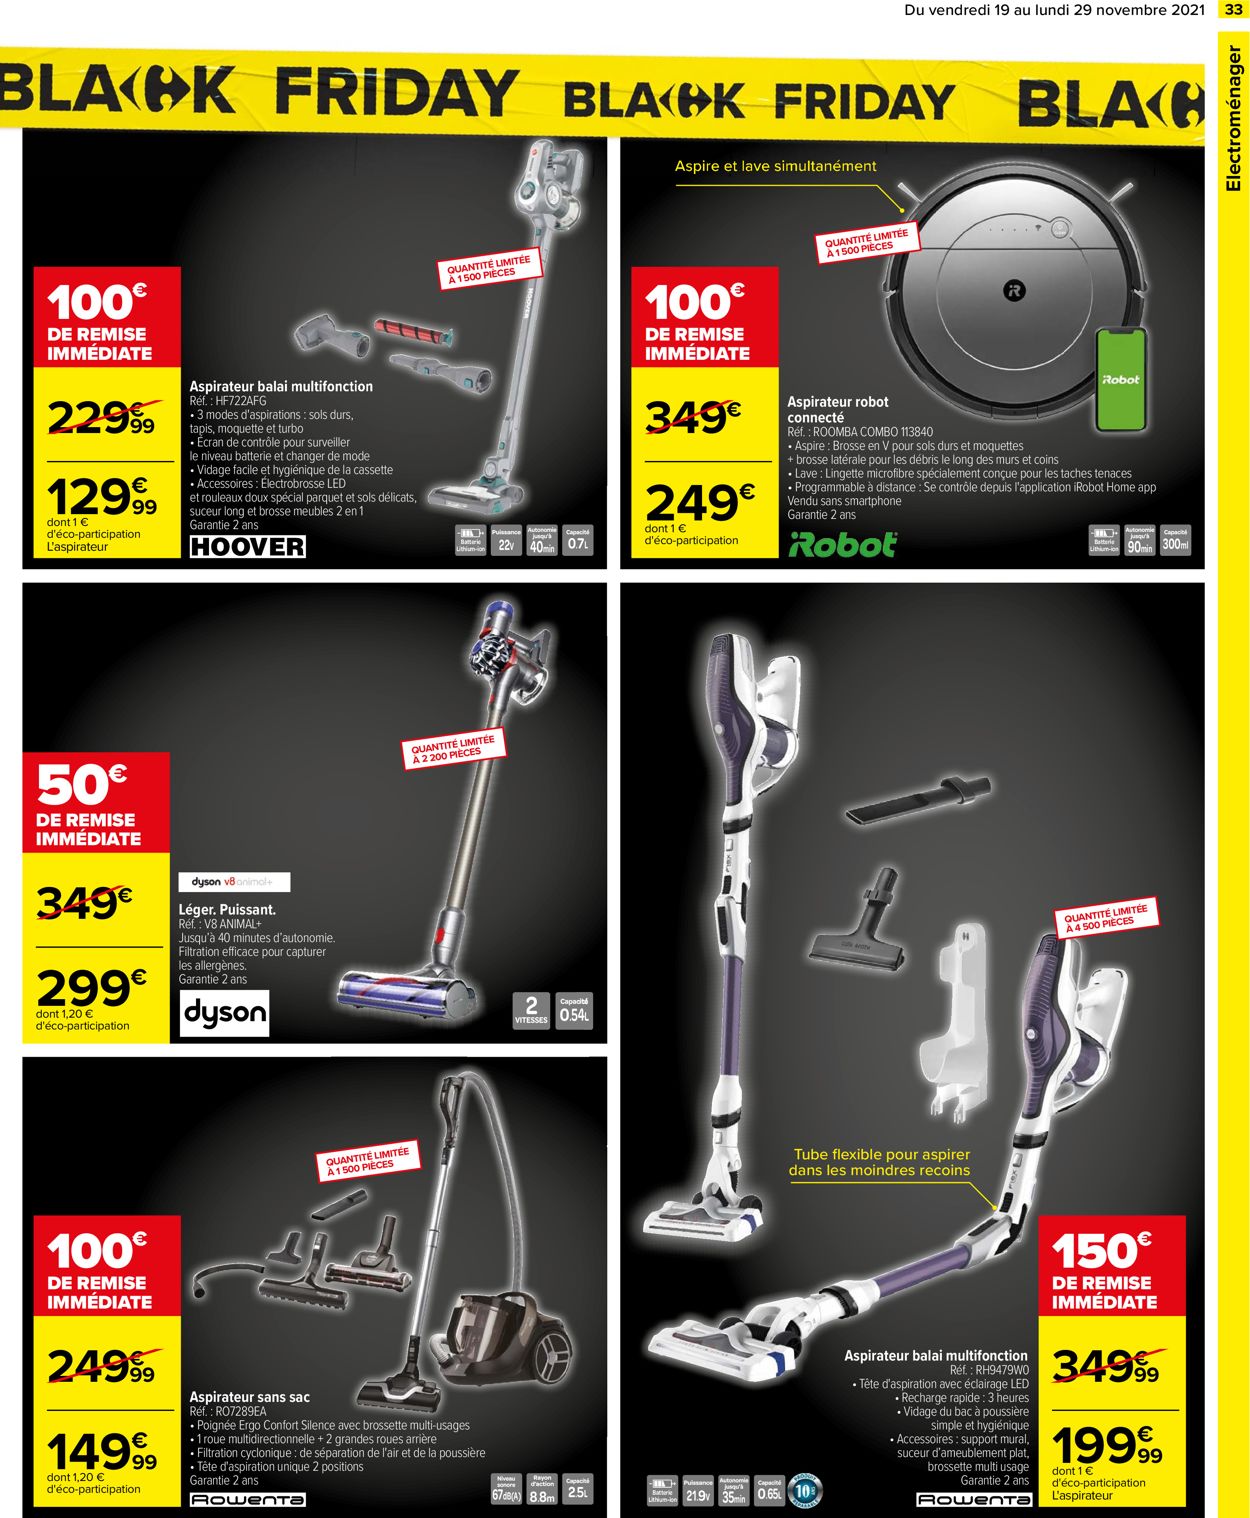 Carrefour BLACK WEEK 2021 Catalogue - 19.11-29.11.2021 (Page 33)